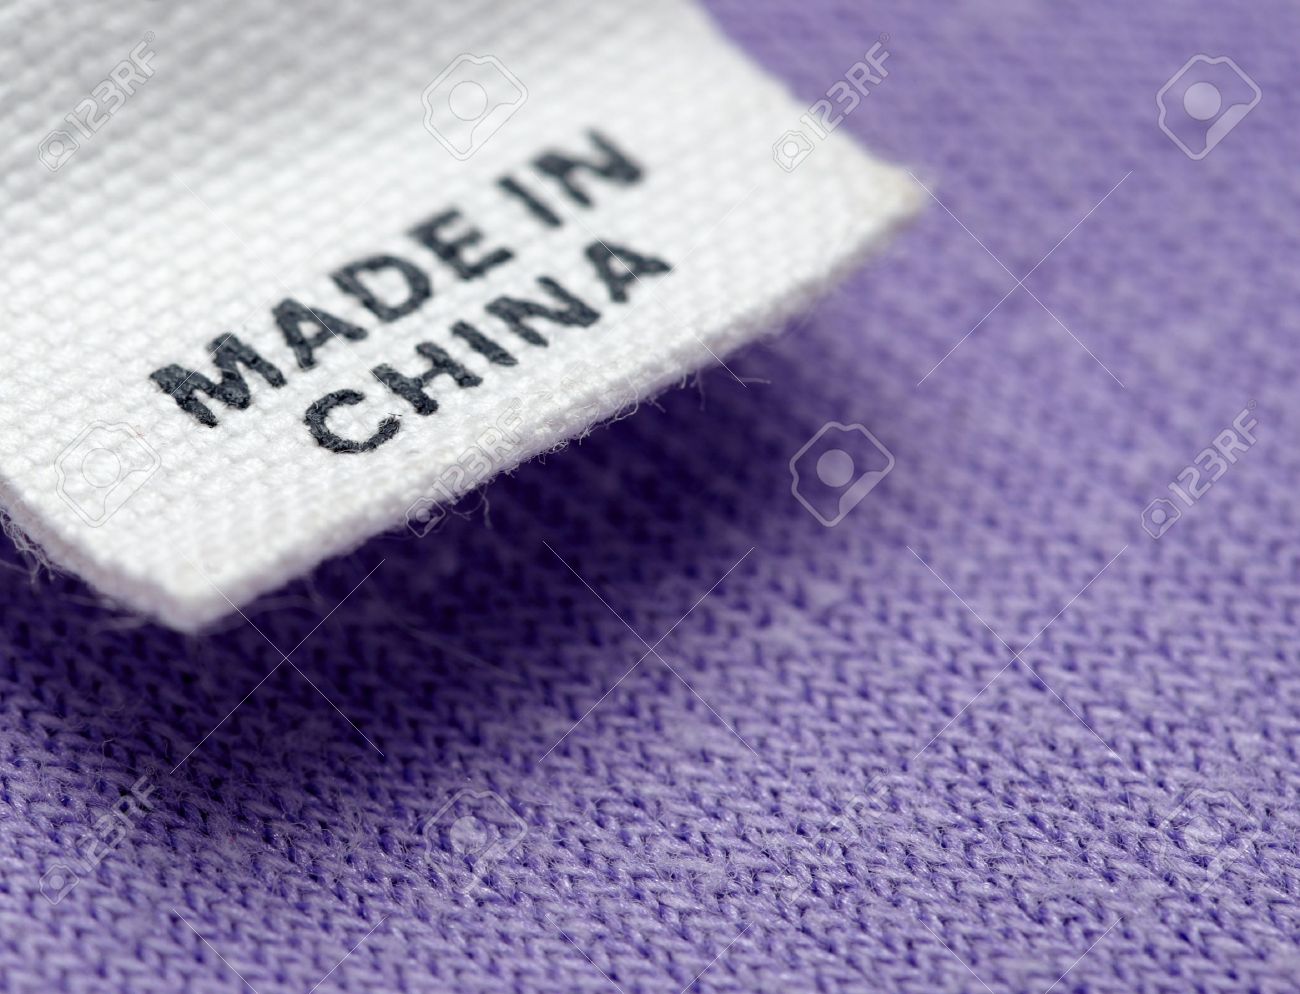 High Quality Made in China Label Blank Meme Template